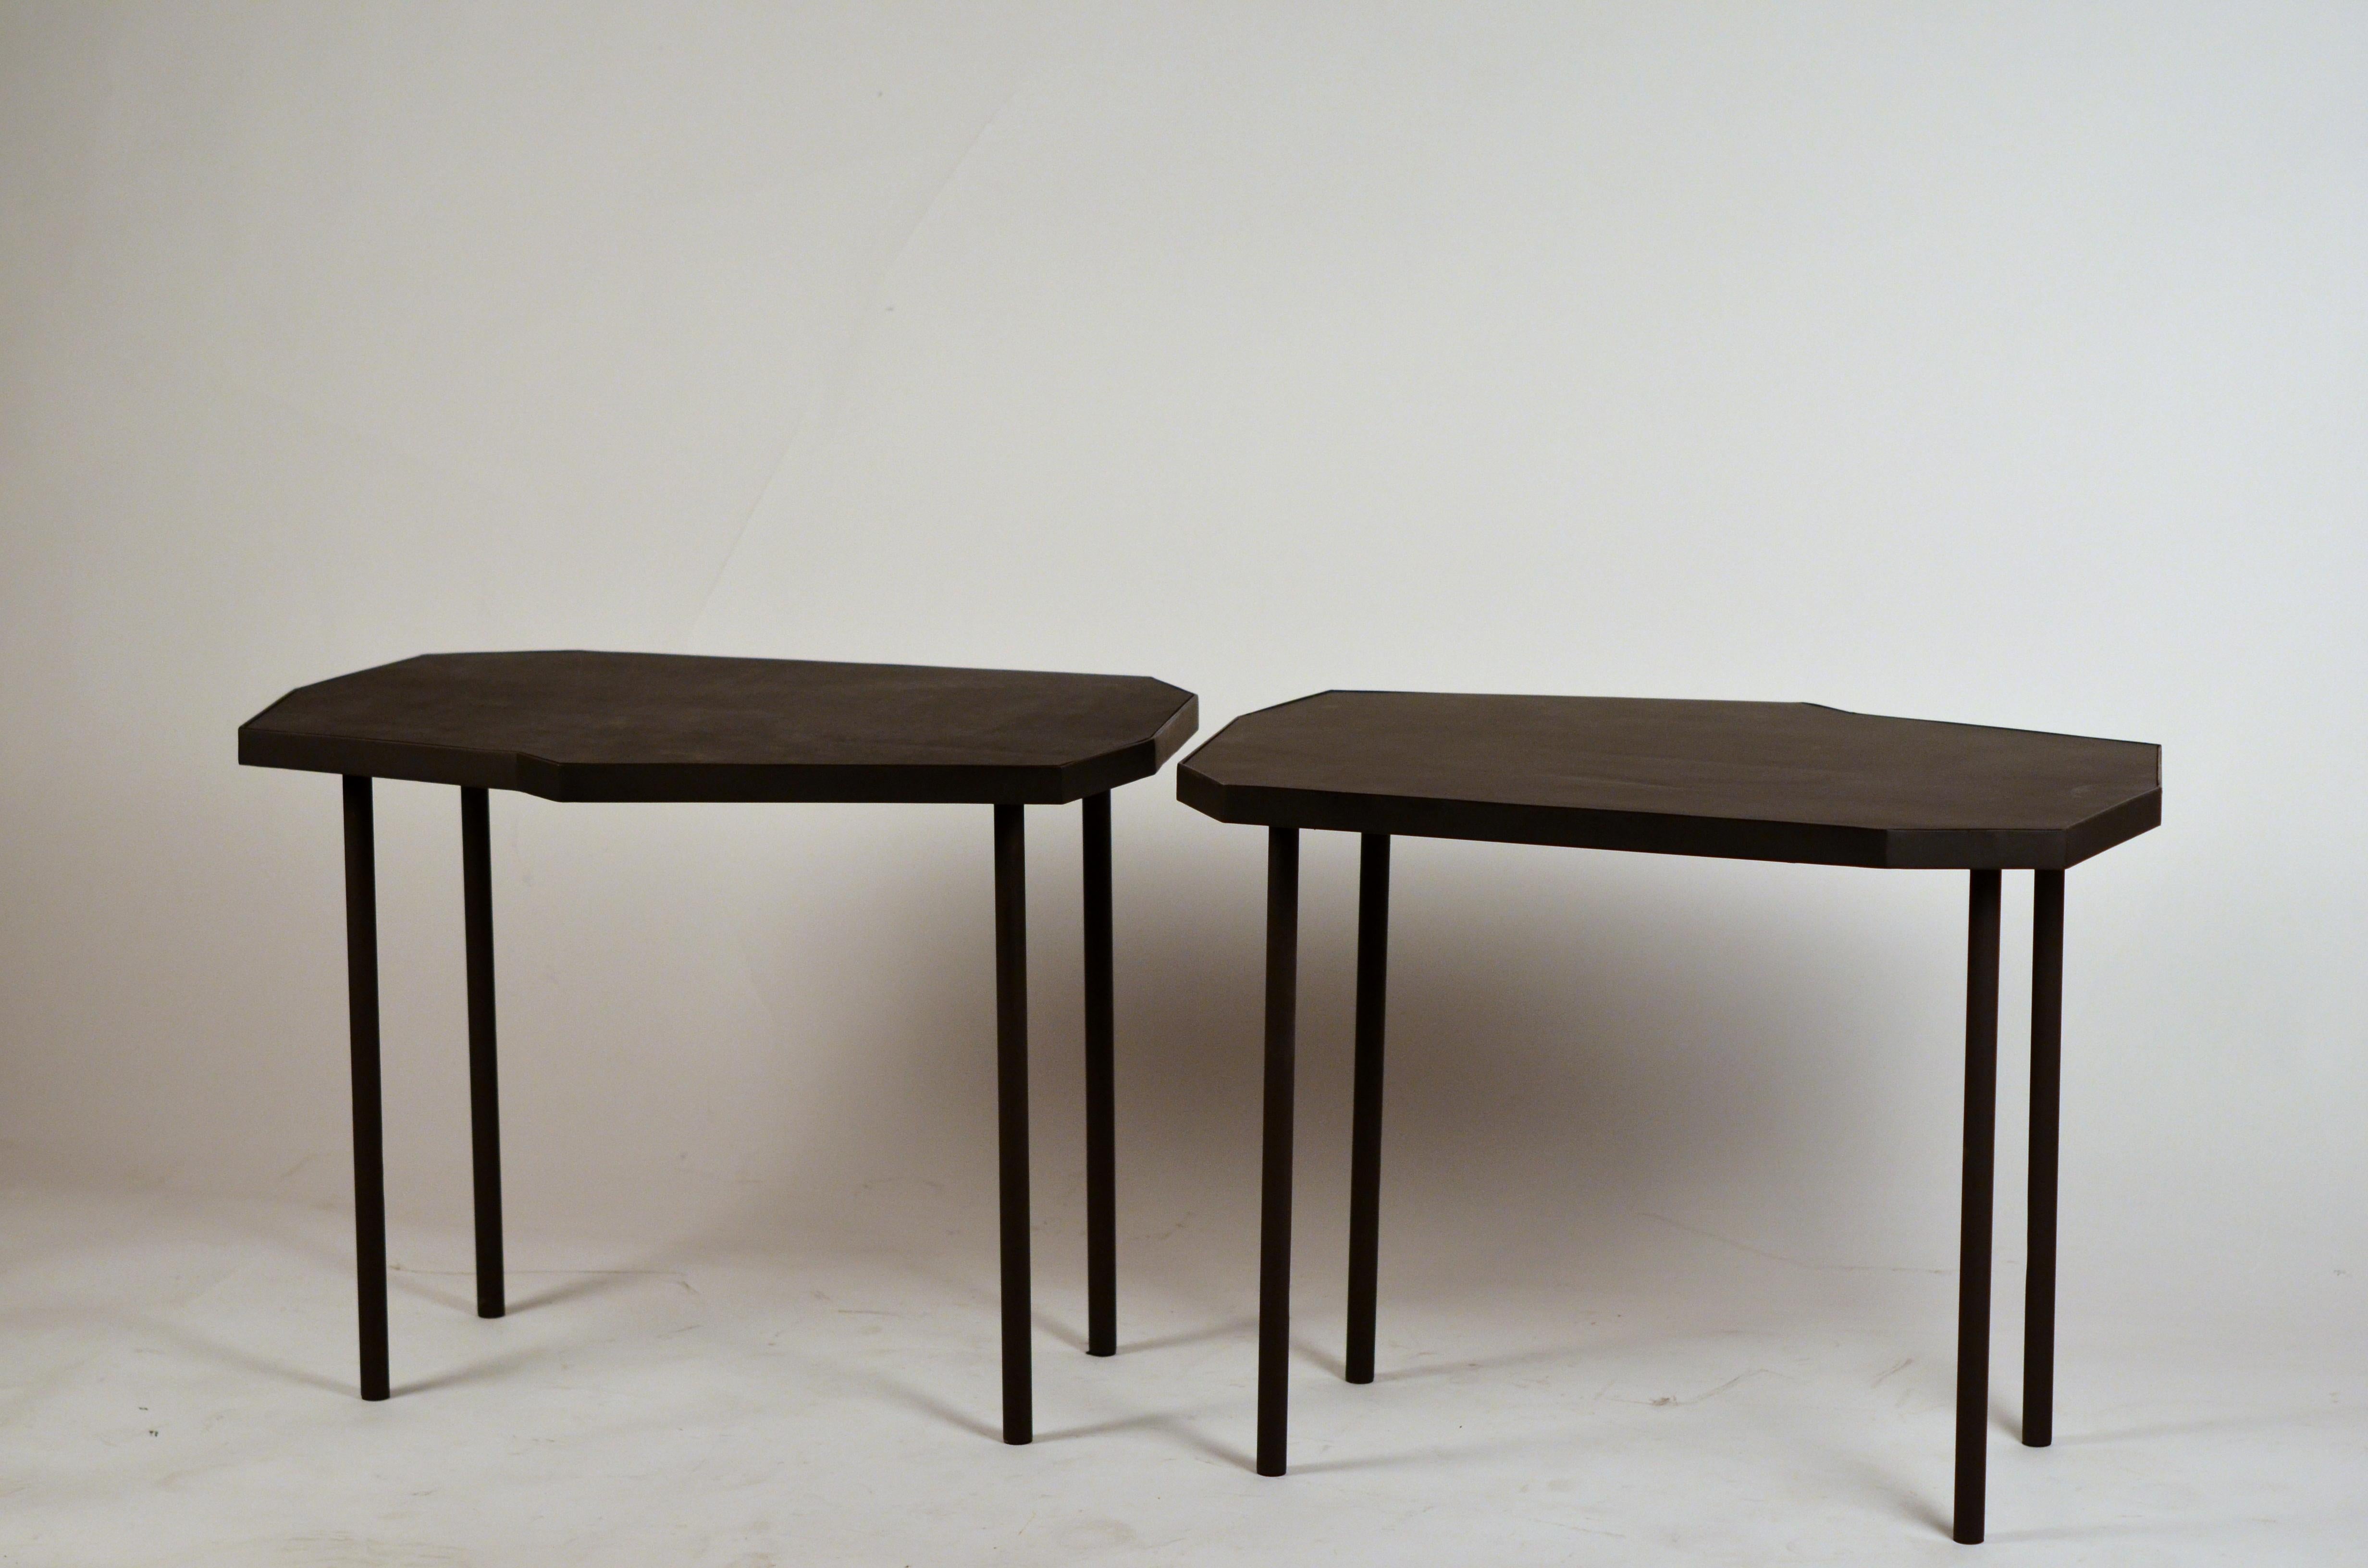 Pair of asymmetrical 'Décagone' black leather side tables by Design Frères.

Great next to a pair of armchairs.